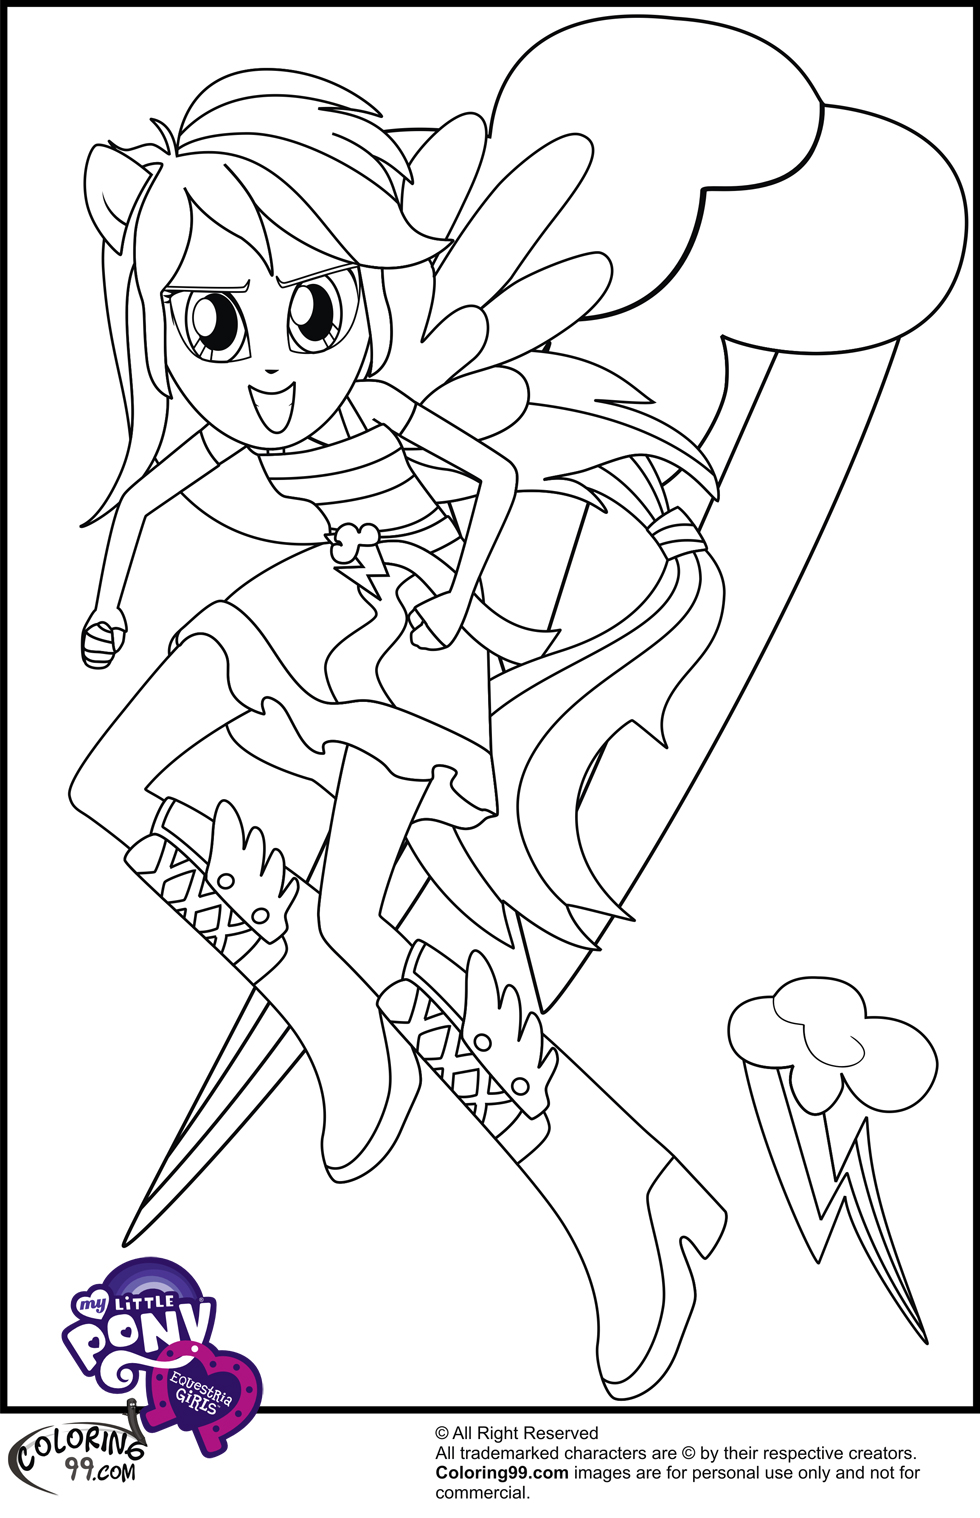  My  Little  Pony  Equestria  Girls  Coloring  Pages  Team colors